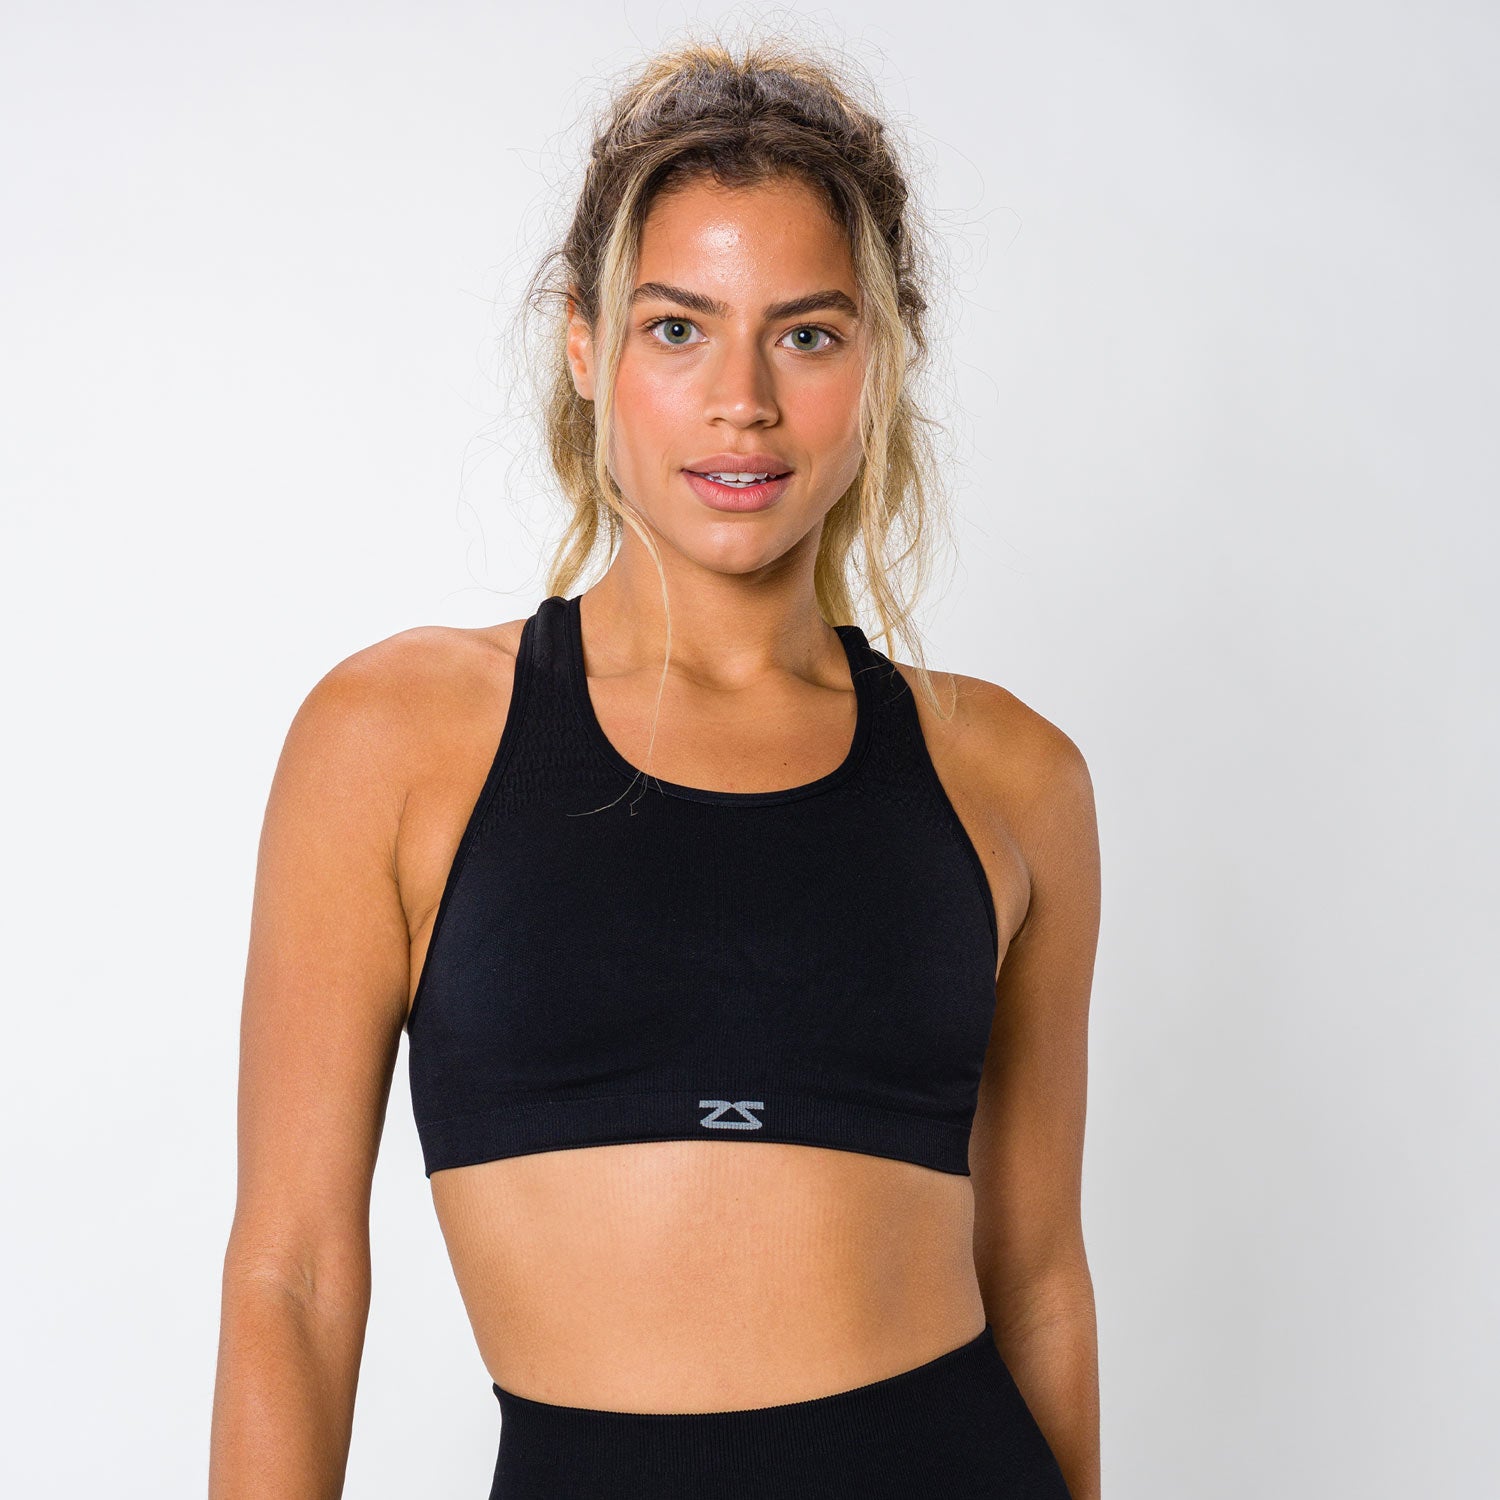 Featured Sports Bras, Best Sports Bras for Running & Workouts